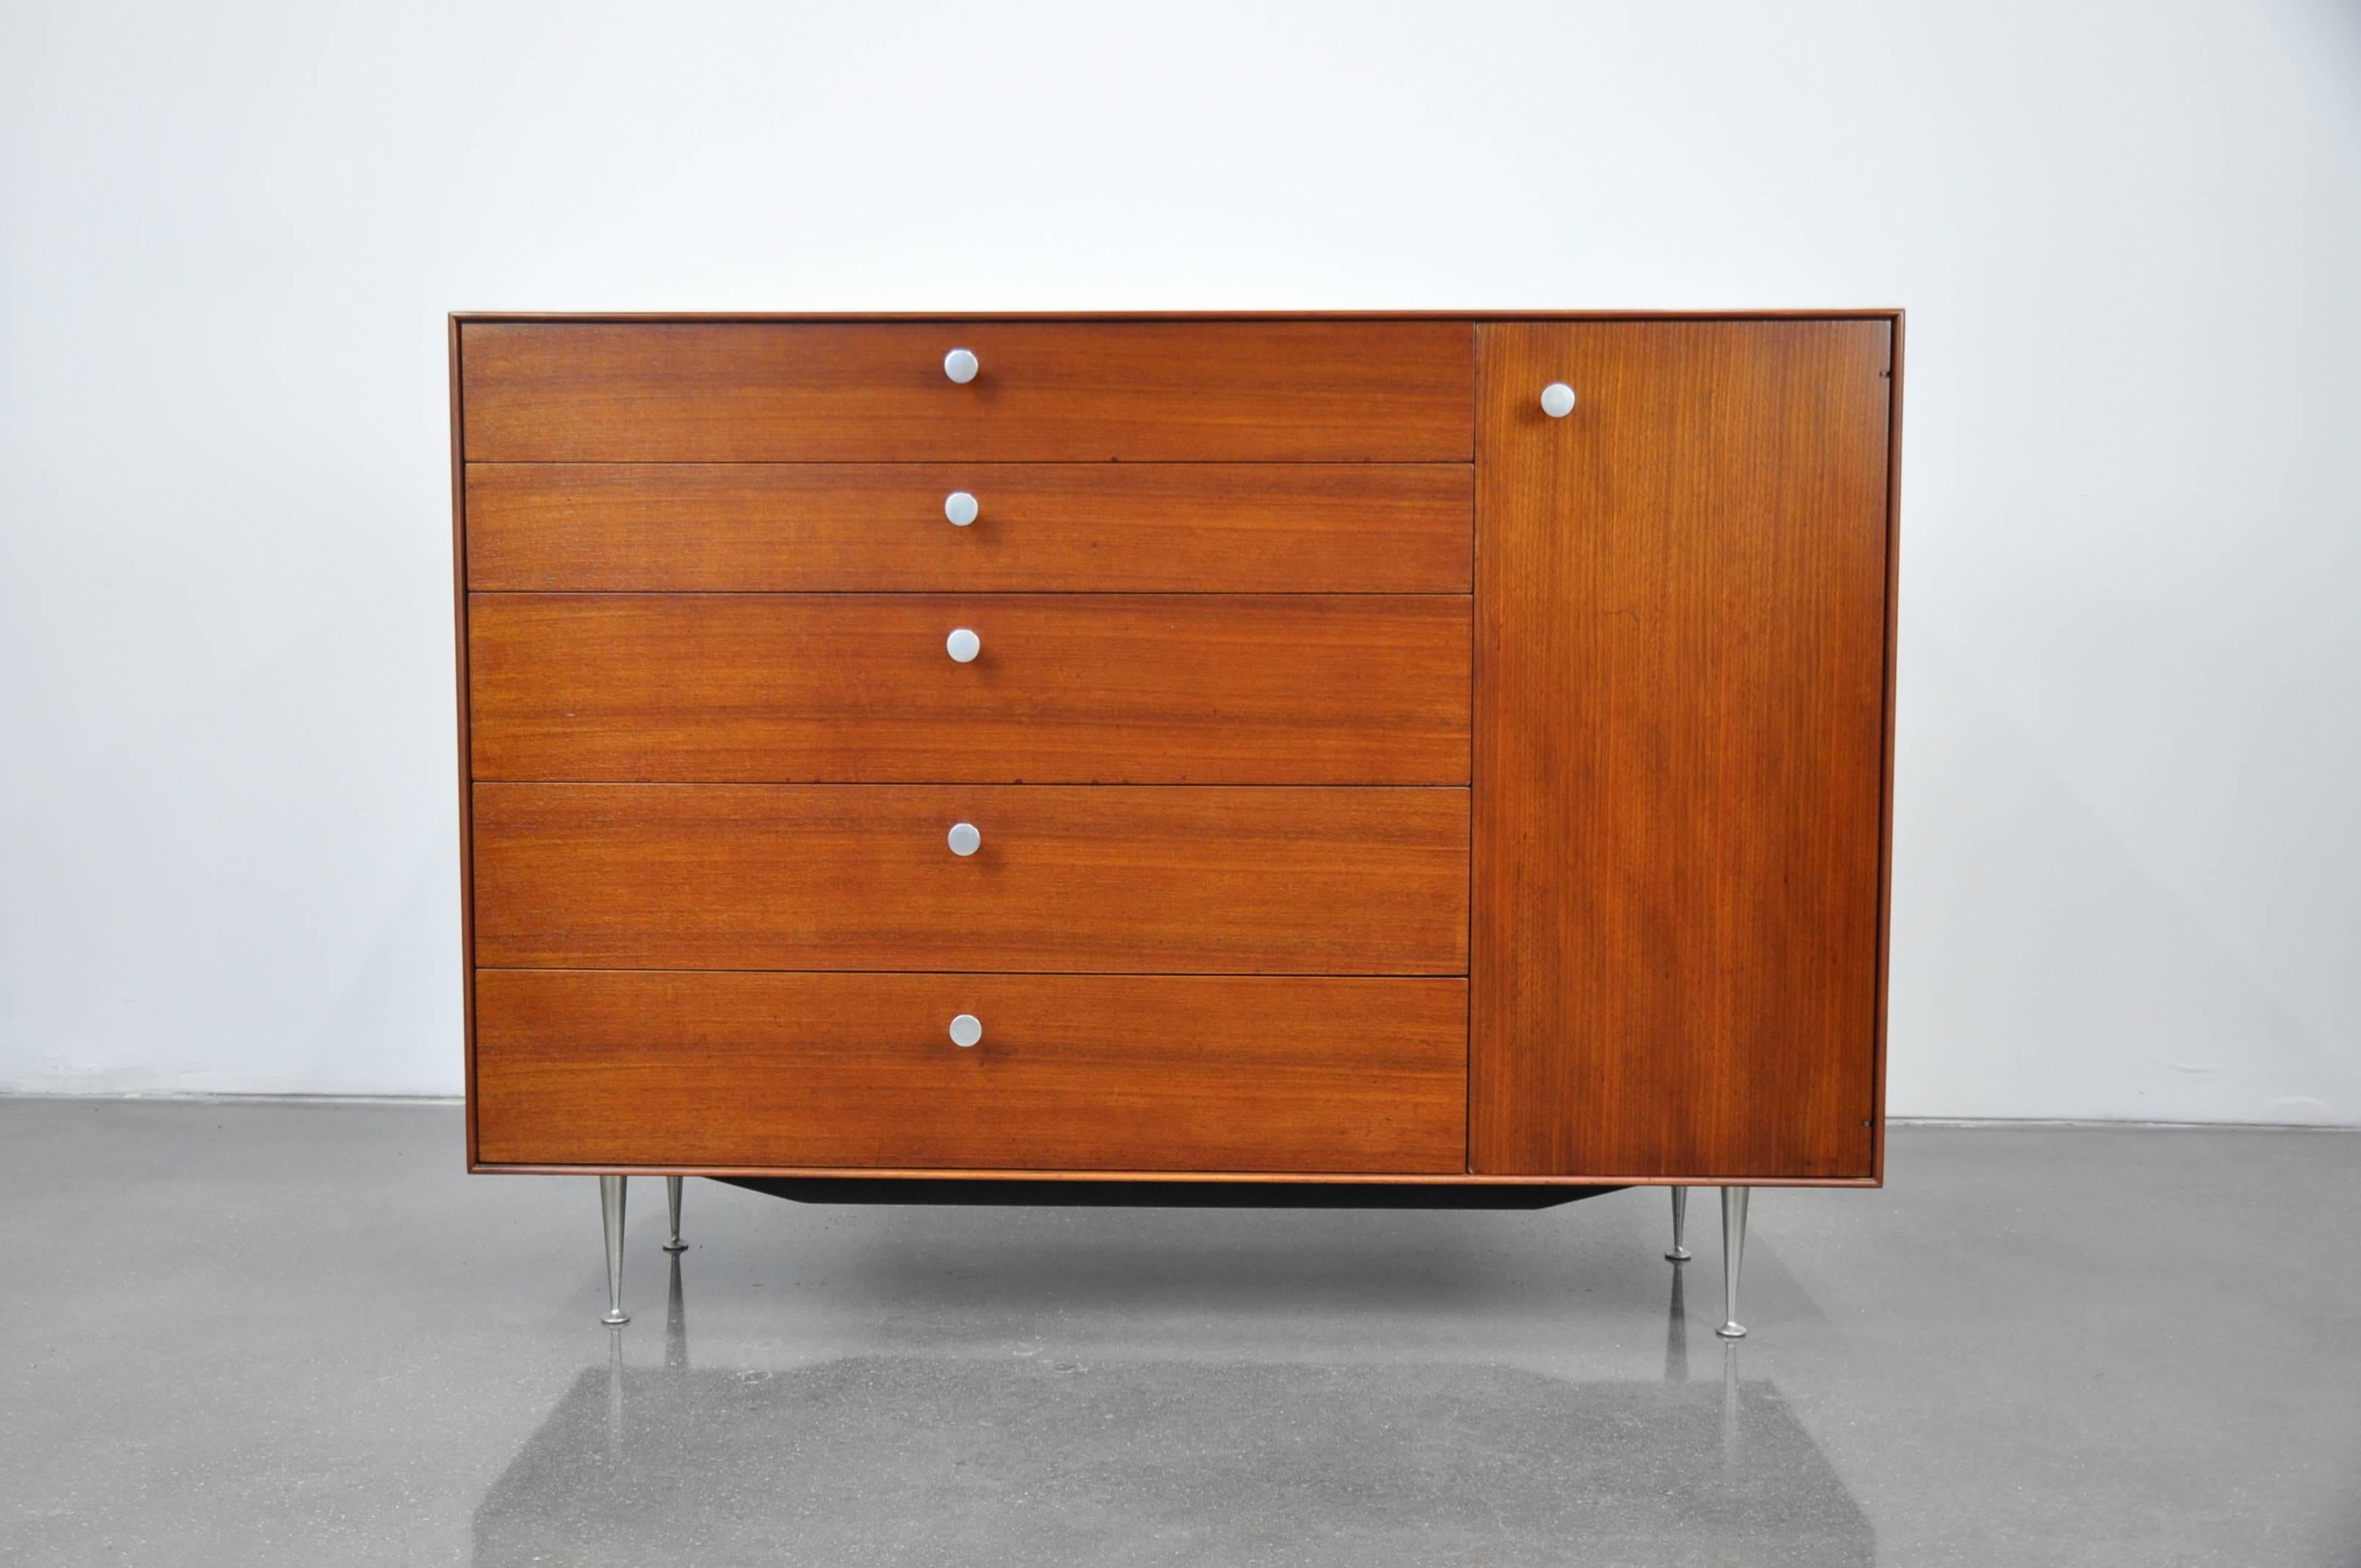 Superb Mid-Century American Modern dresser cabinet model 5245 from George Nelson's Thin Edge series that was first produced by Herman Miller in 1952. The chest features five drawers of graduating sizes flanked by a one credenza style door opening to